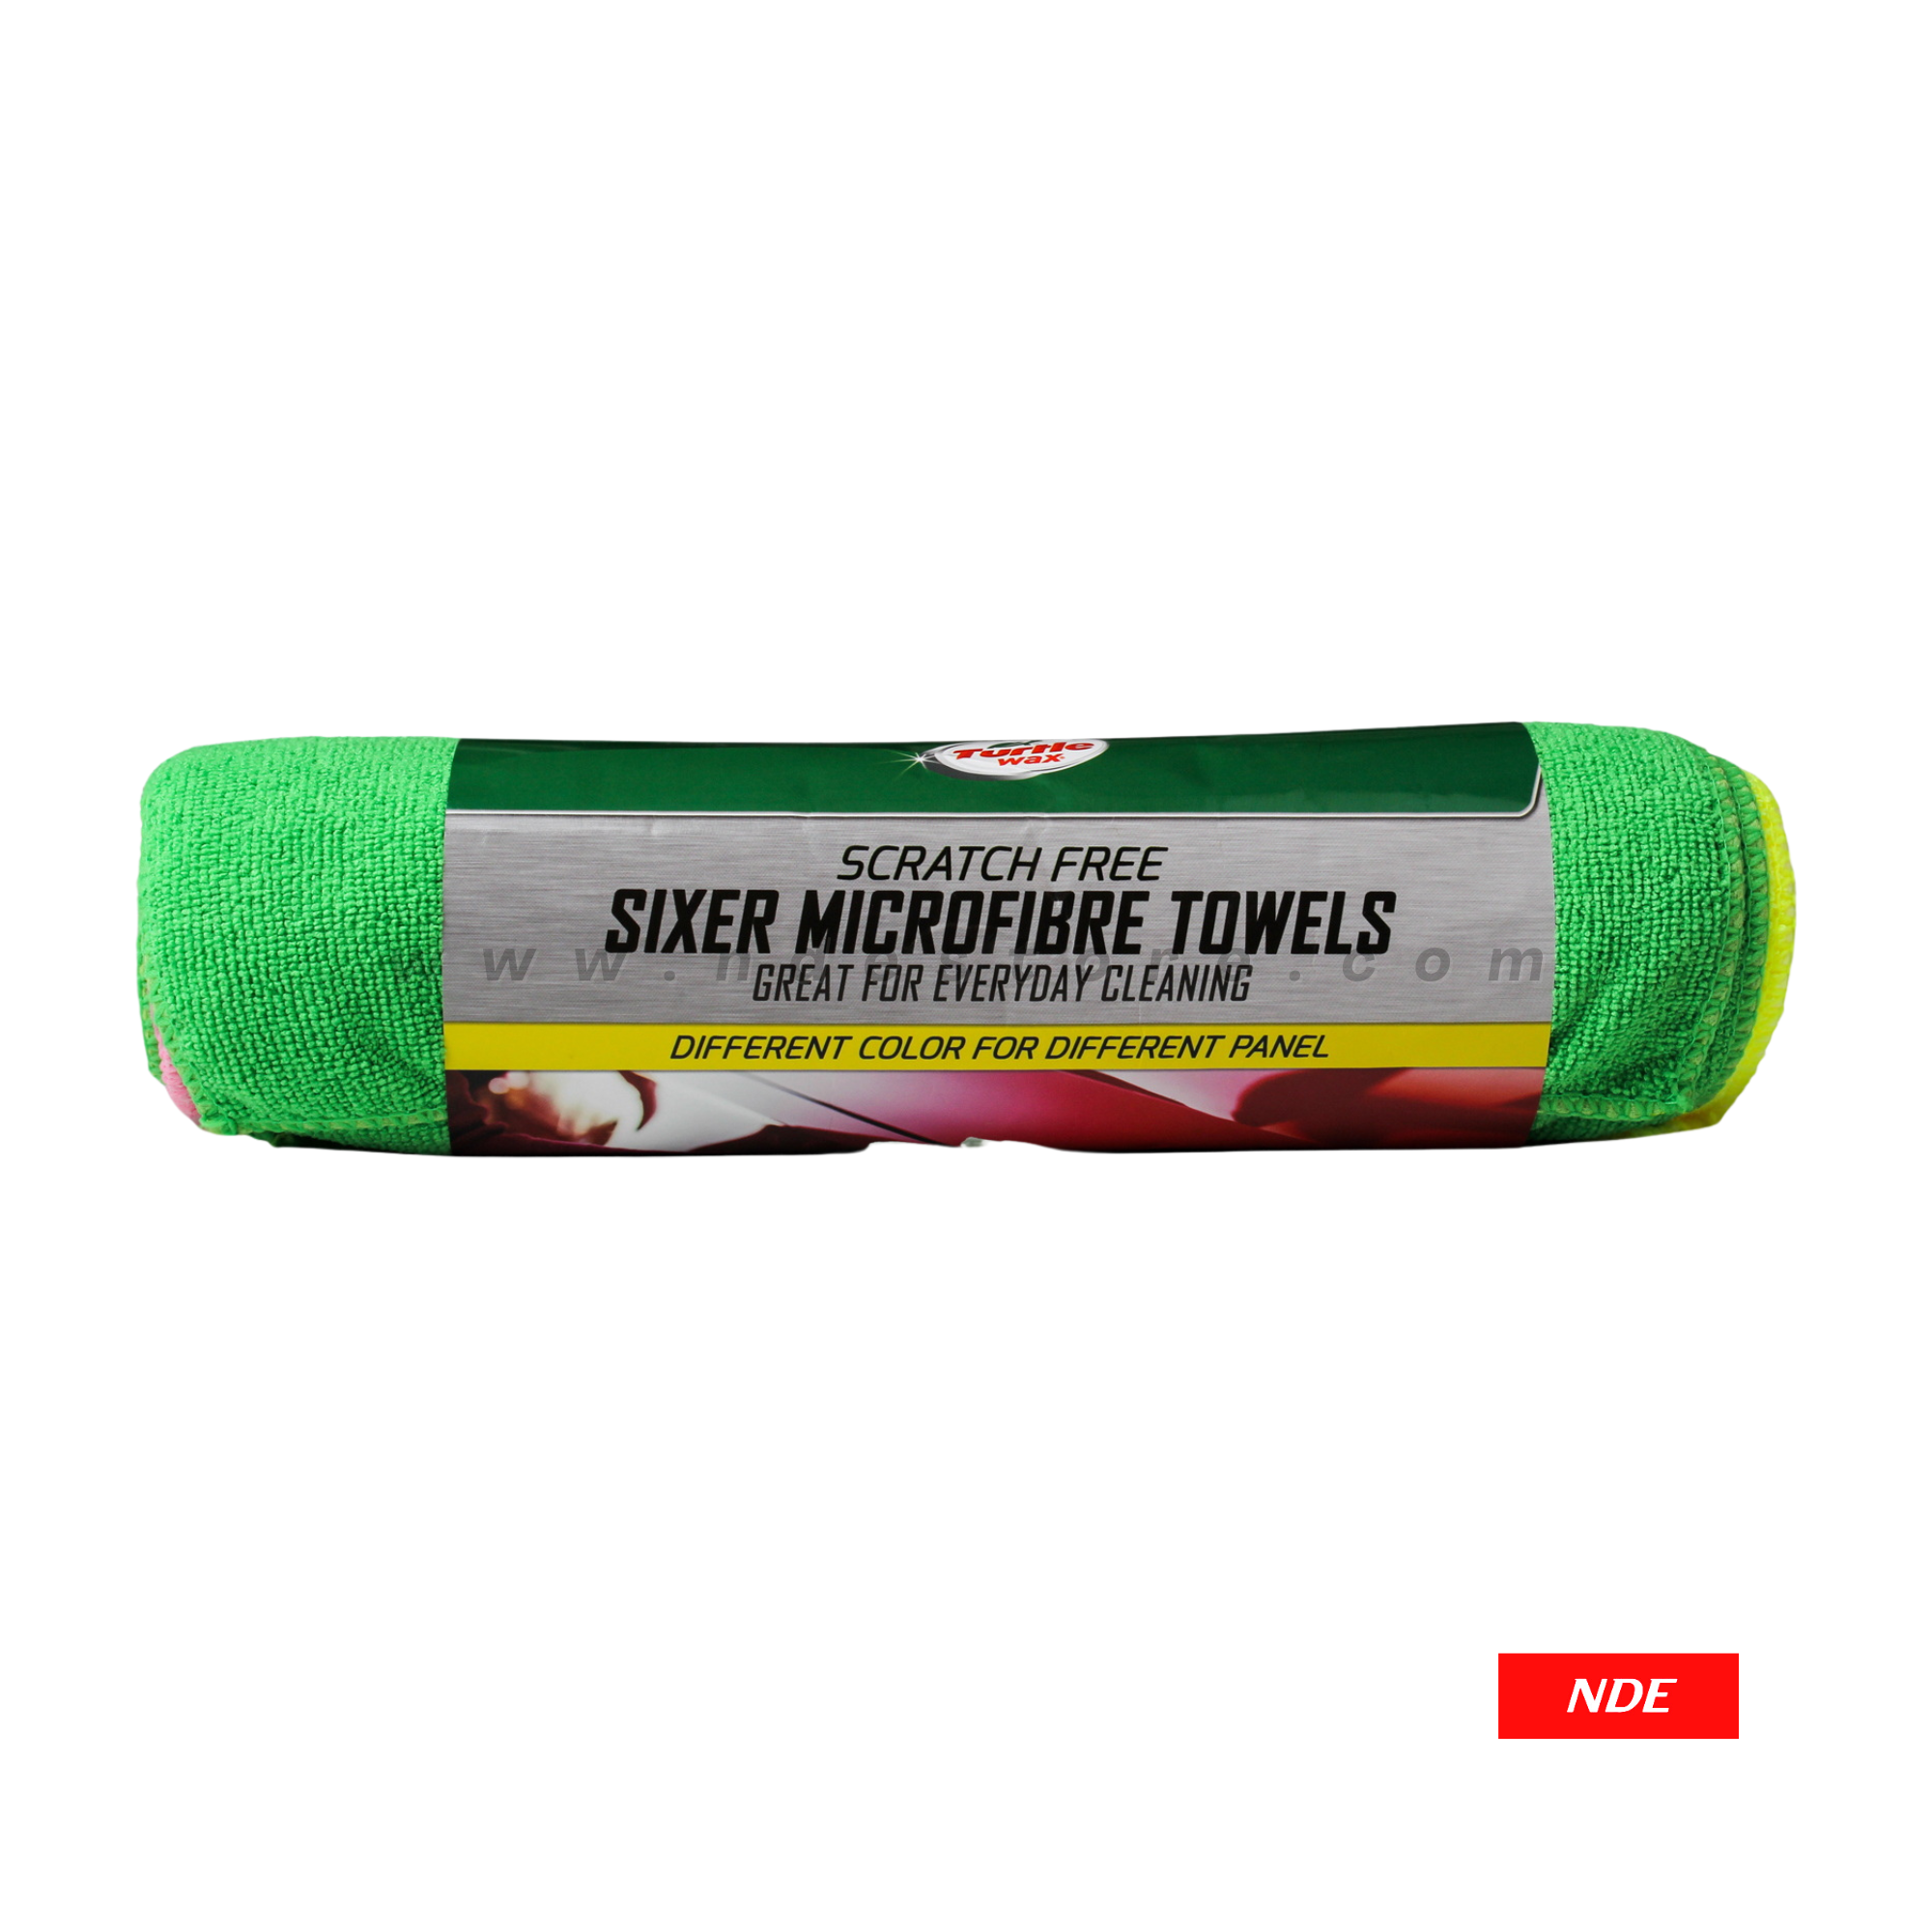 TURTLE WAX, SCRATCH FREE SIXER MICROFIBRE TOWELS